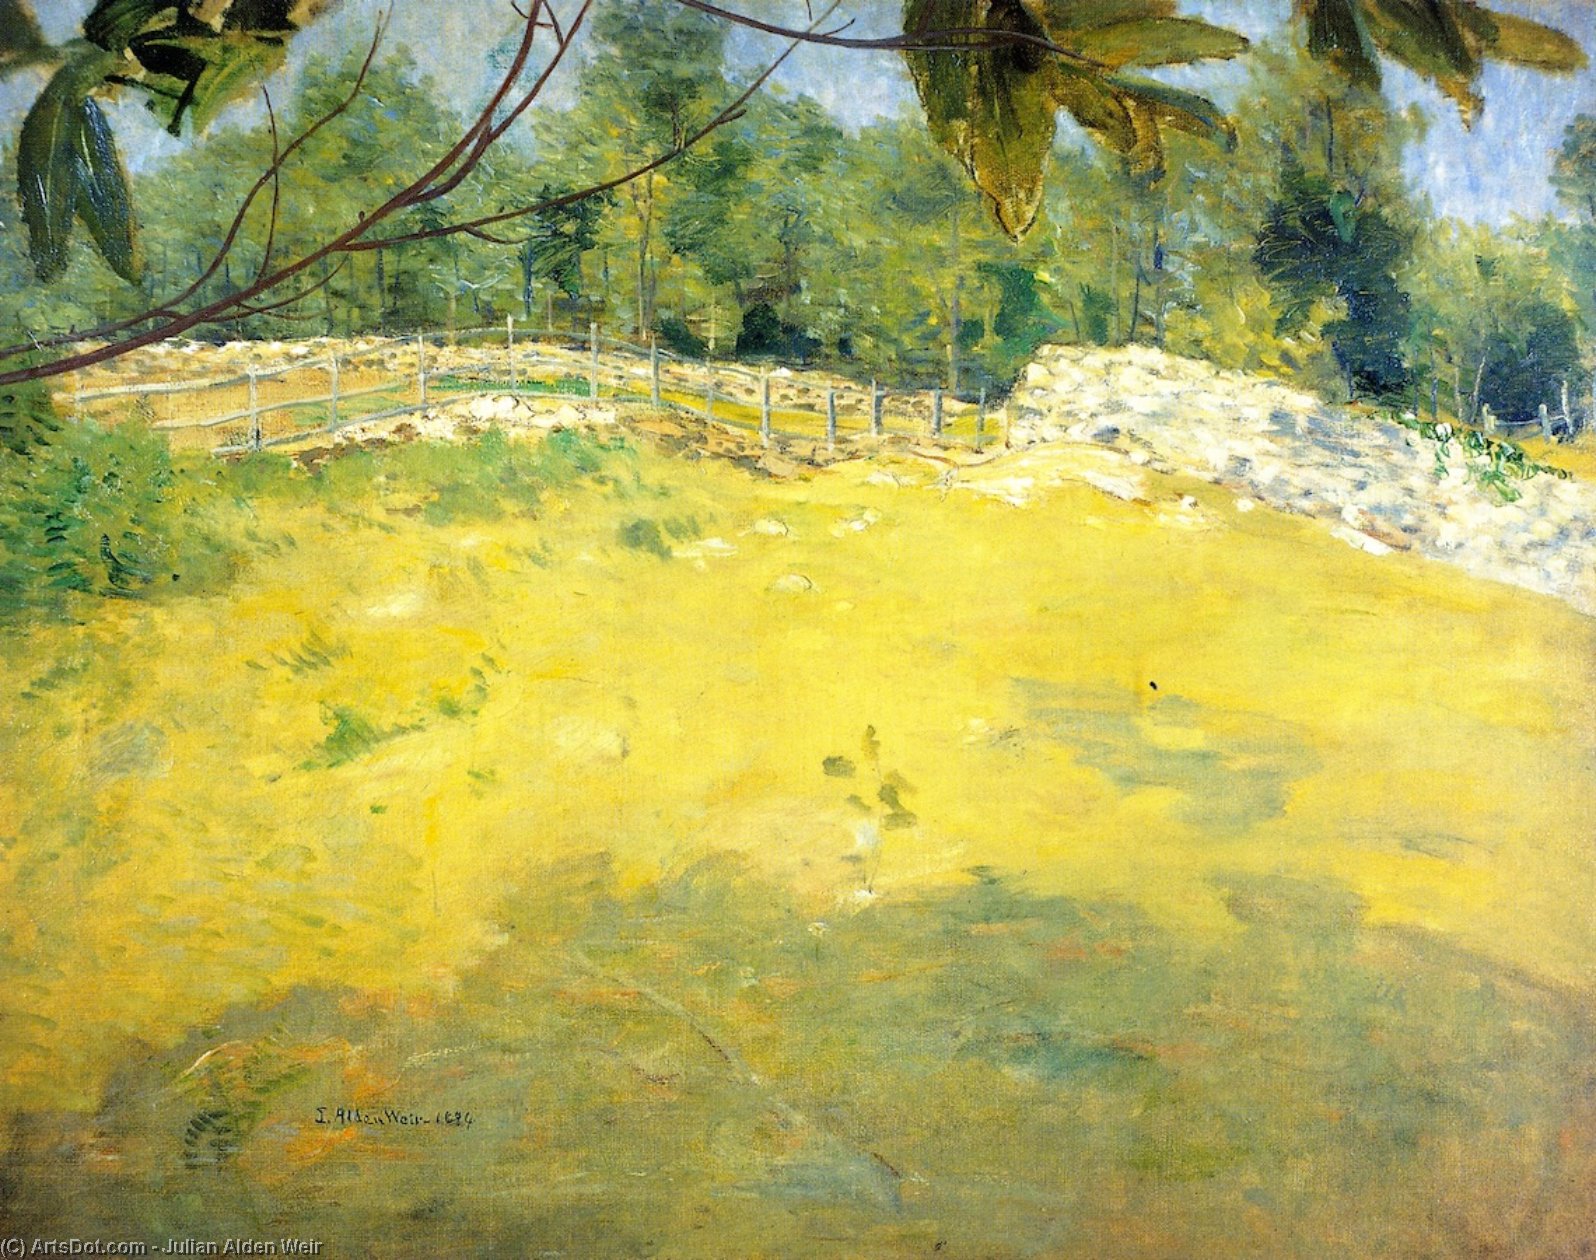 Order Artwork Replica In the Shade of a Tree (also known as Sunlight, Connecticut), 1900 by Julian Alden Weir (1852-1919, United States) | ArtsDot.com